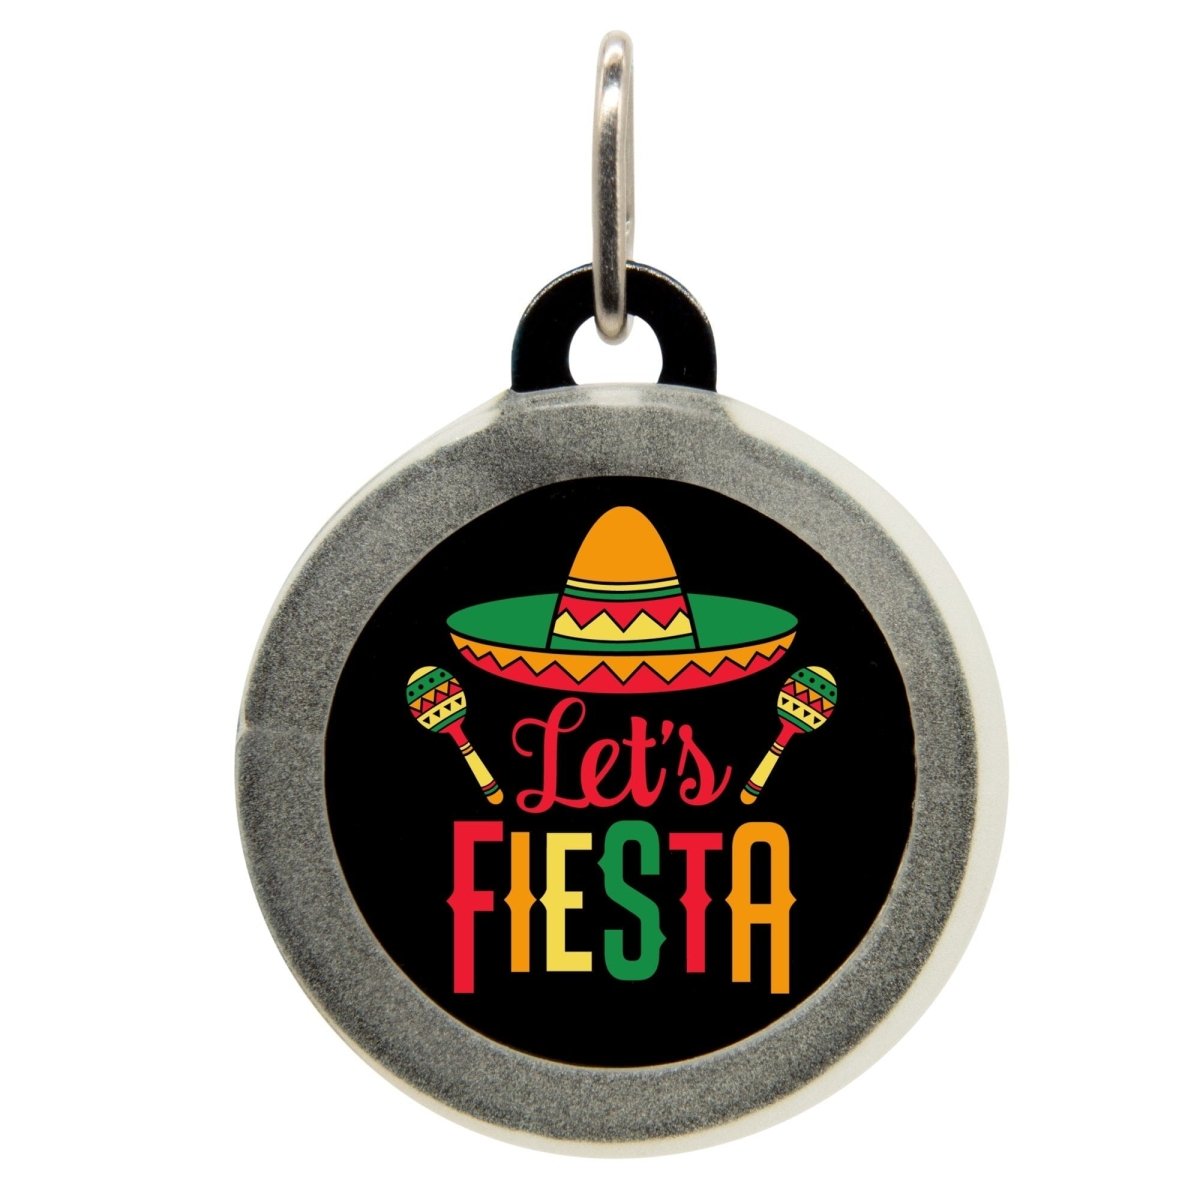 Let's Fiesta Name Tag - Oh My Paw'd